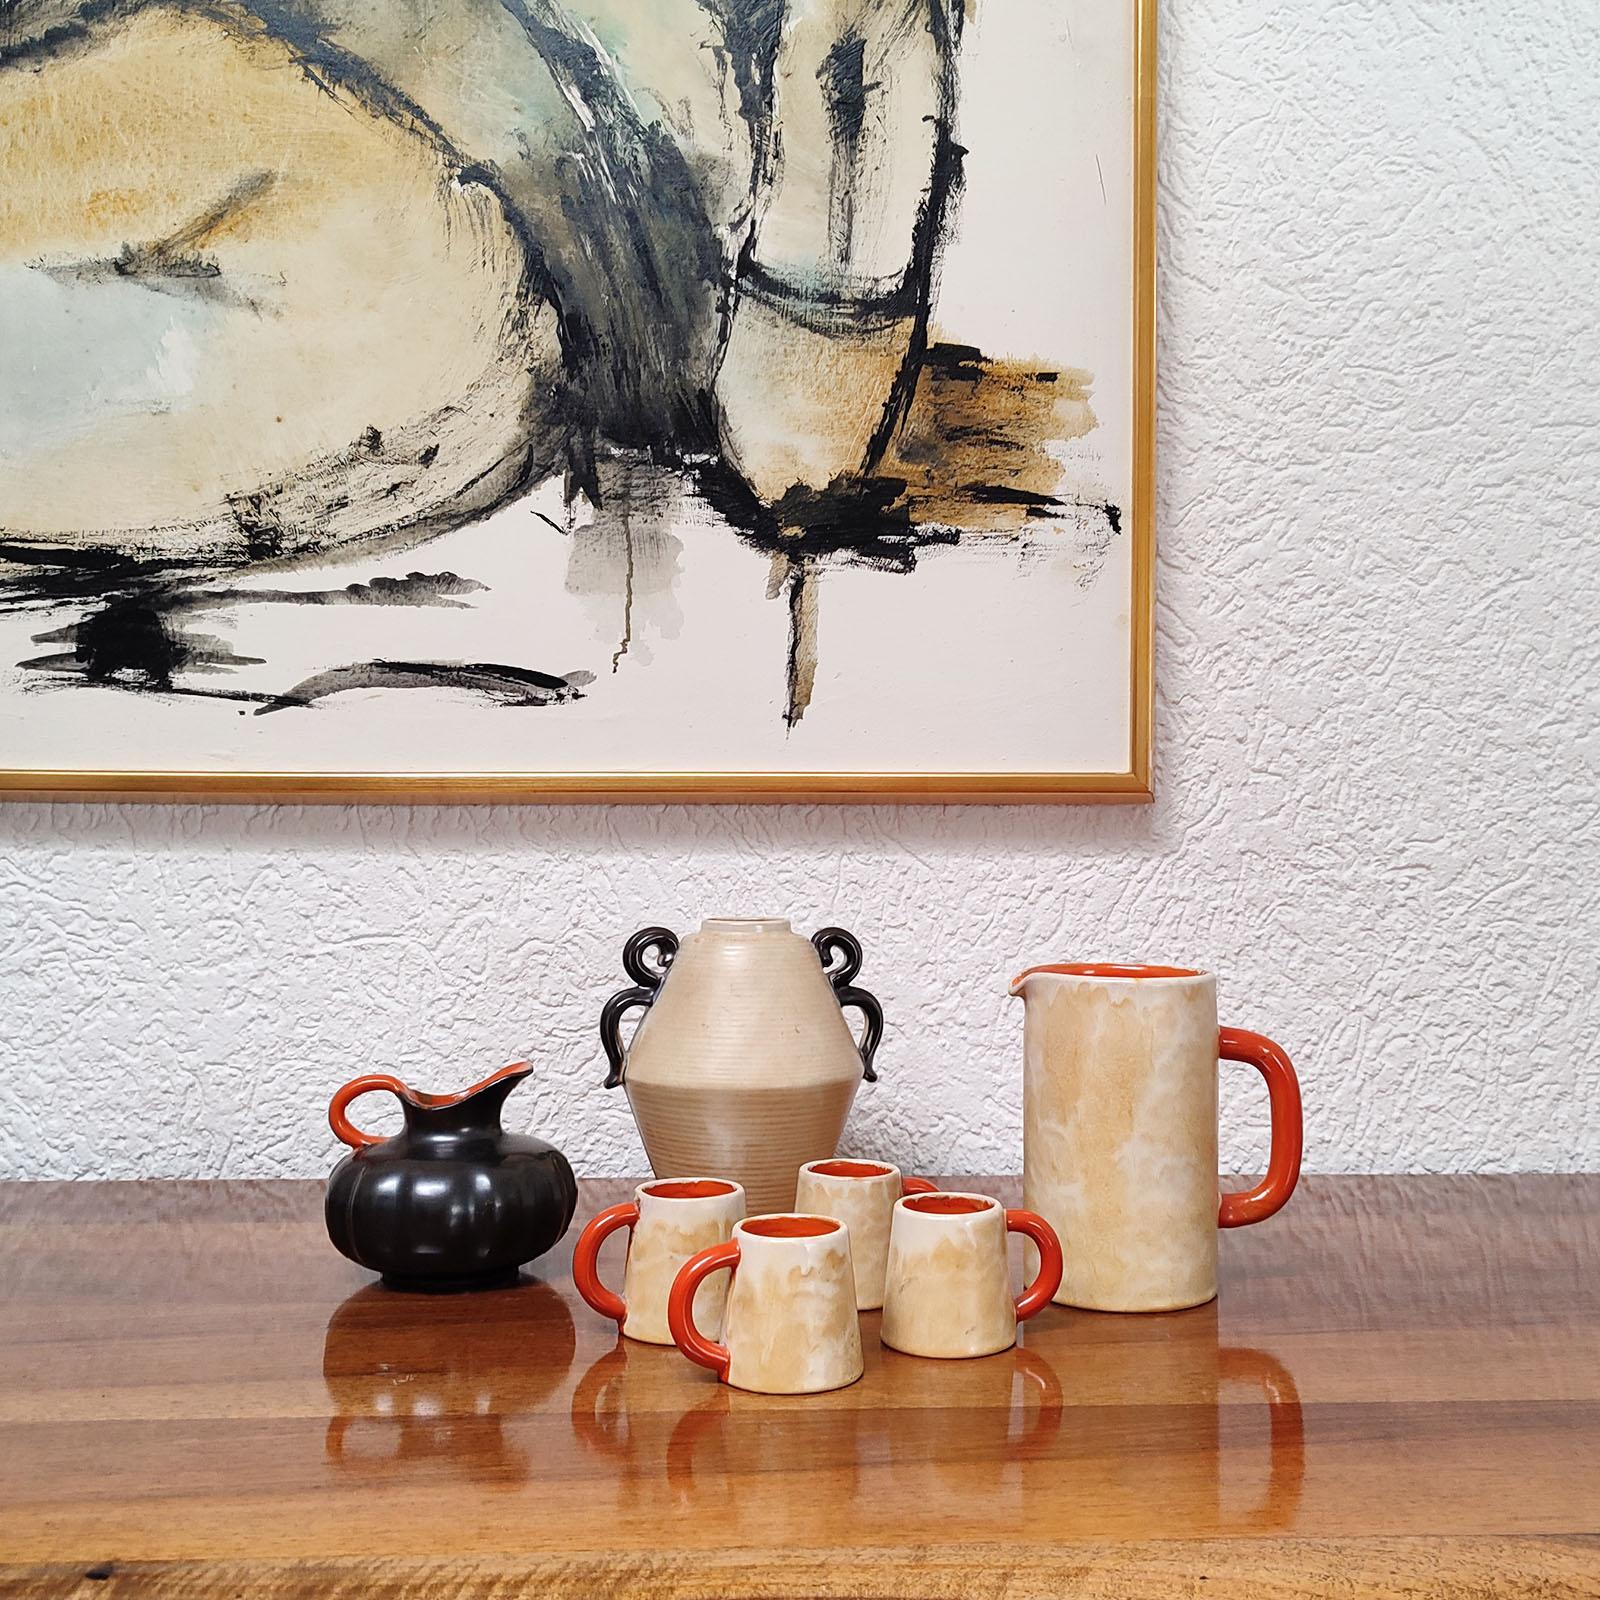 Early modernist stoneware vessels designed by Anna-Lisa Thomson, for Upsala-Ekeby, Sweden, 1930s.
Comprising:
1 - a pitcher and four mugs in marbleized yellow outer glaze, with inside and handles glazed in orange glaze.
2 - a gorgeous dark brown